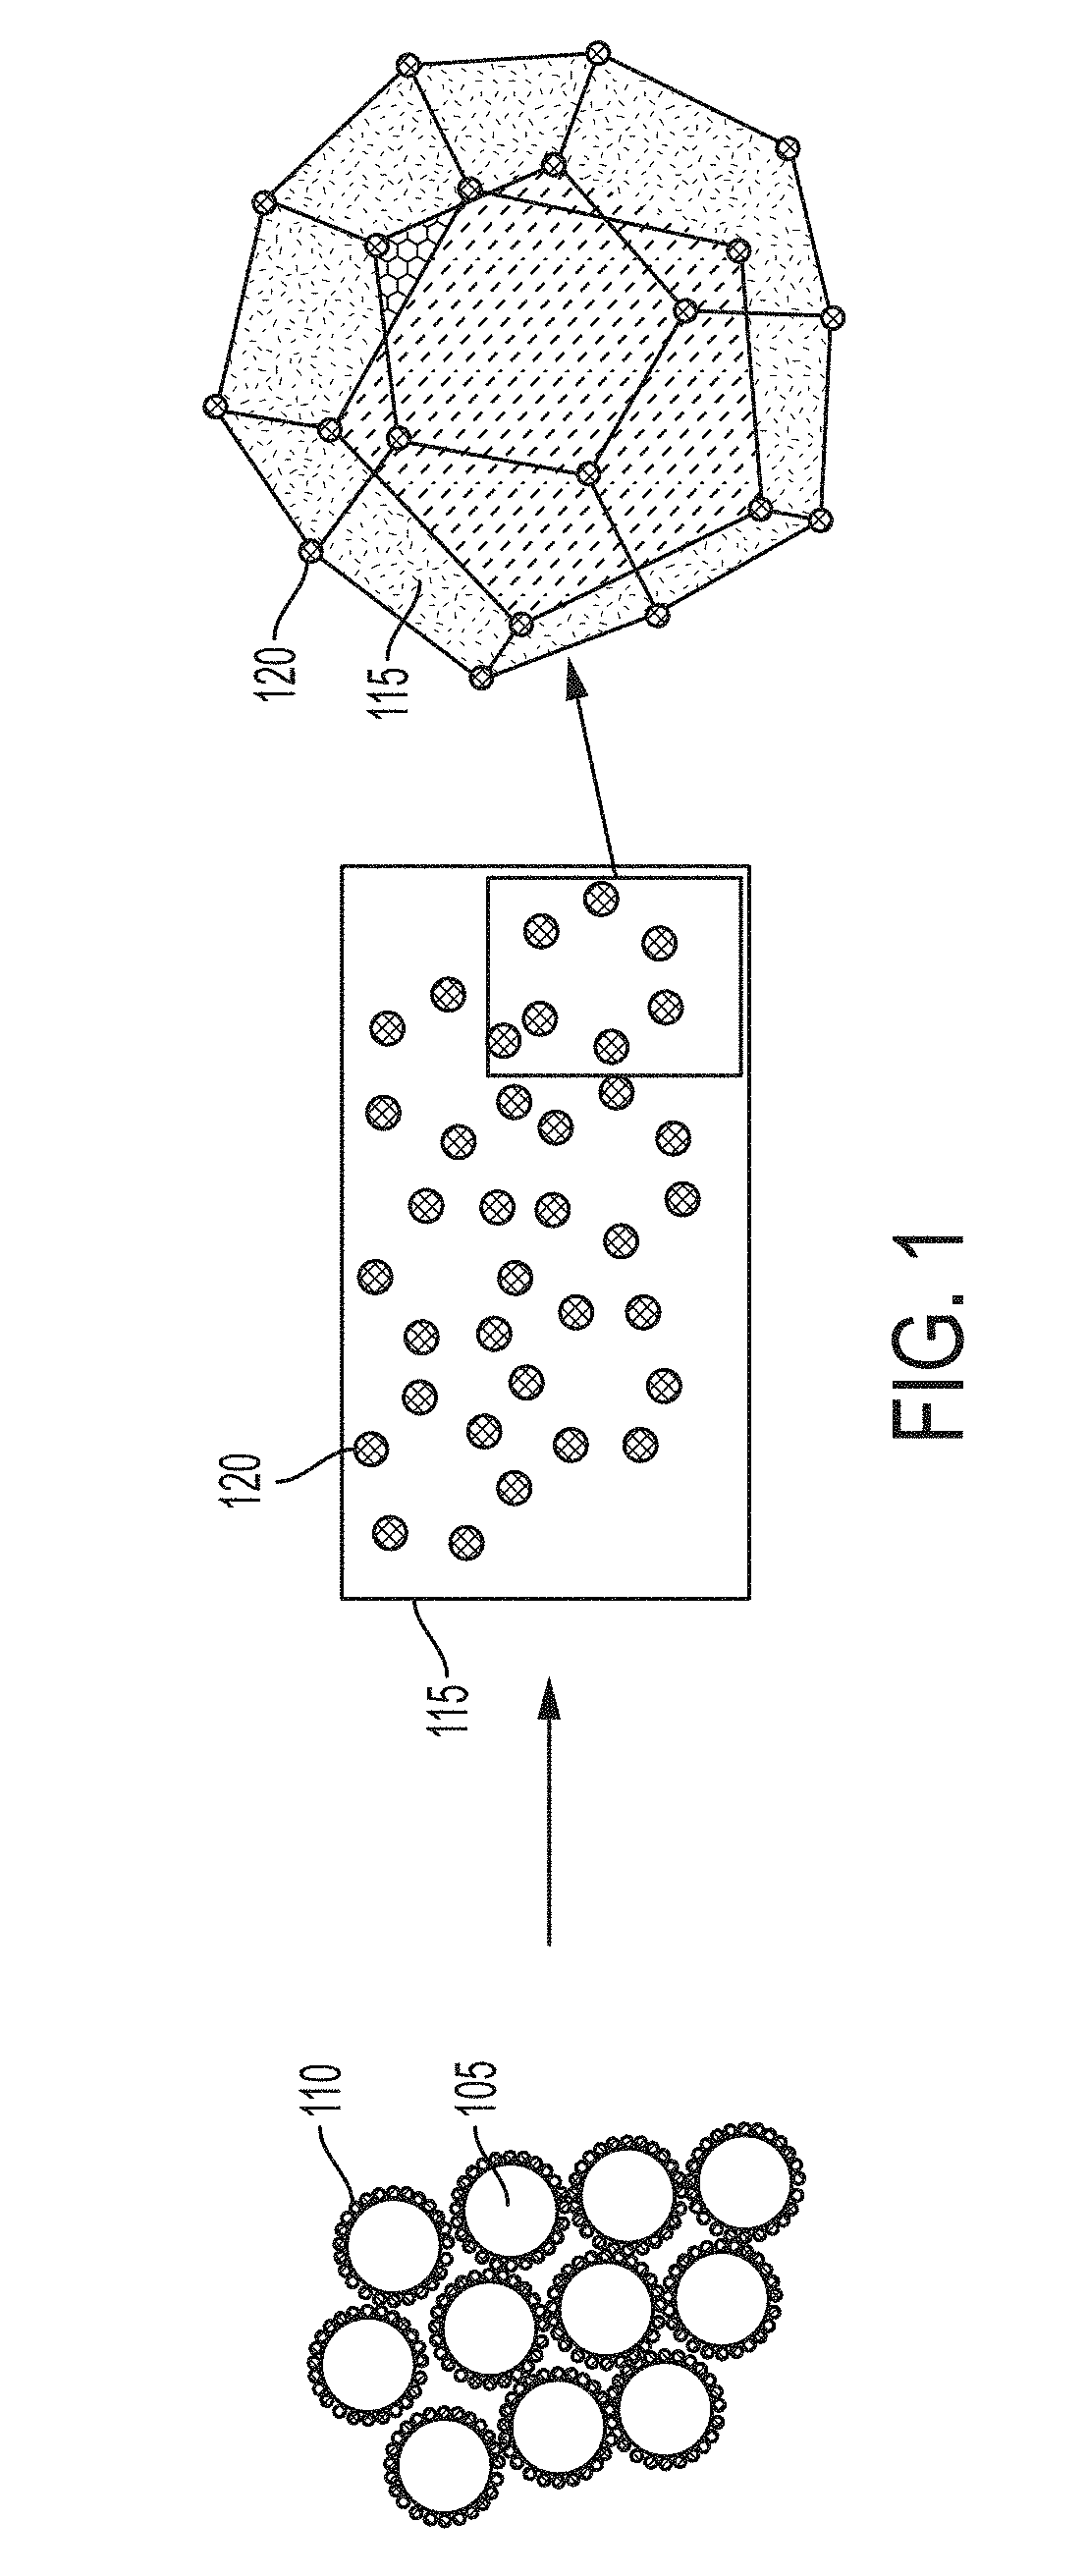 Materials and methods for producing metal nanocomposites, and metal nanocomposites obtained therefrom